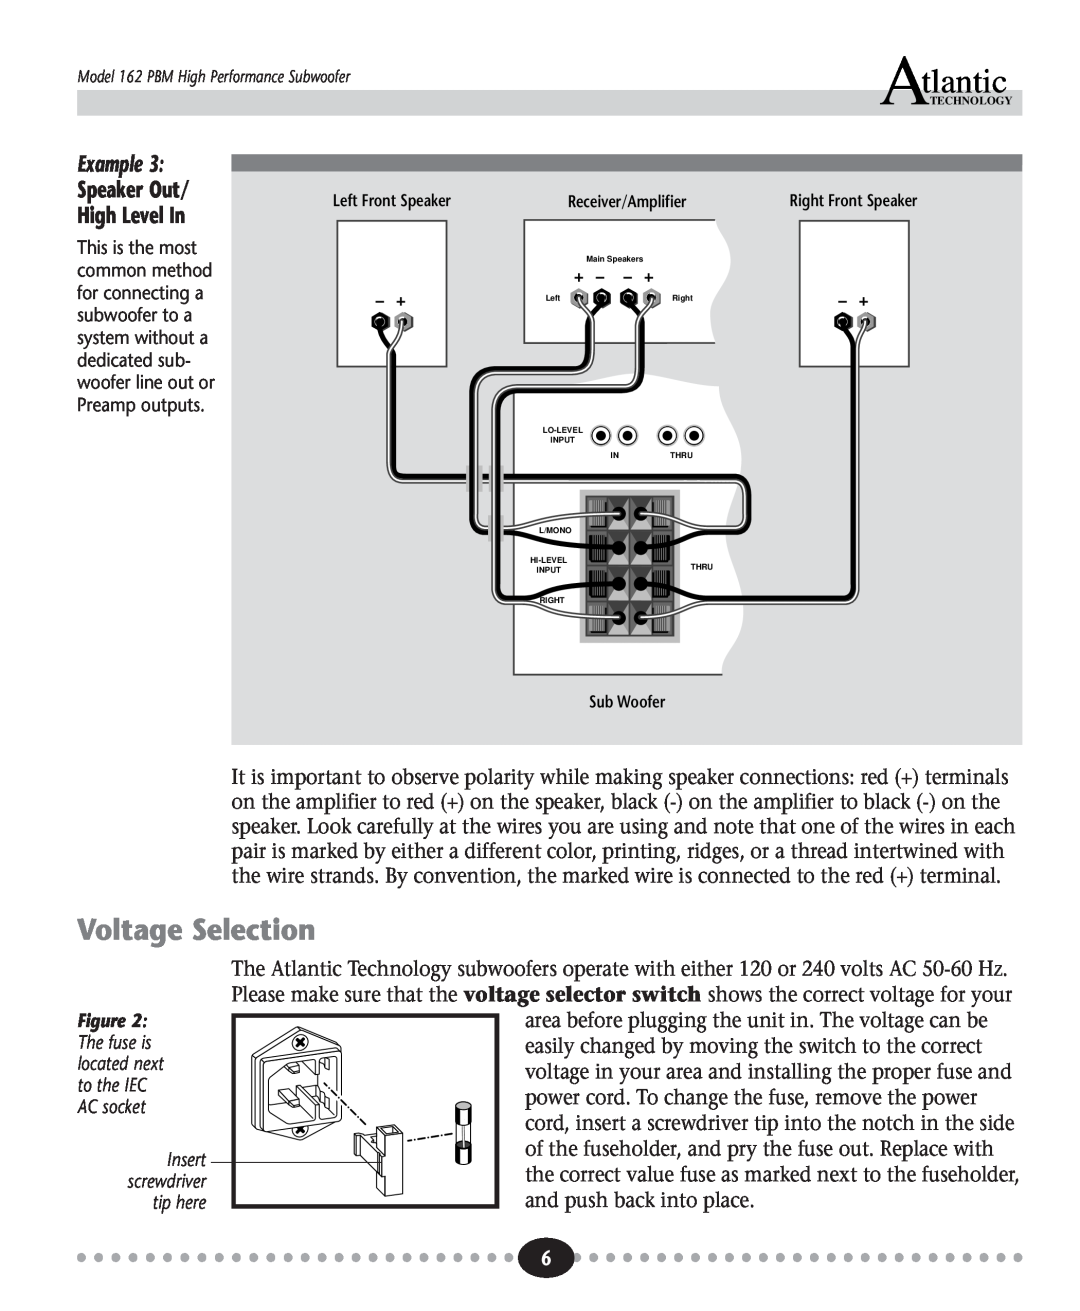 Atlantic Technology 162 PBM instruction manual Voltage Selection, Speaker Out, High Level In, tlantic, Example 